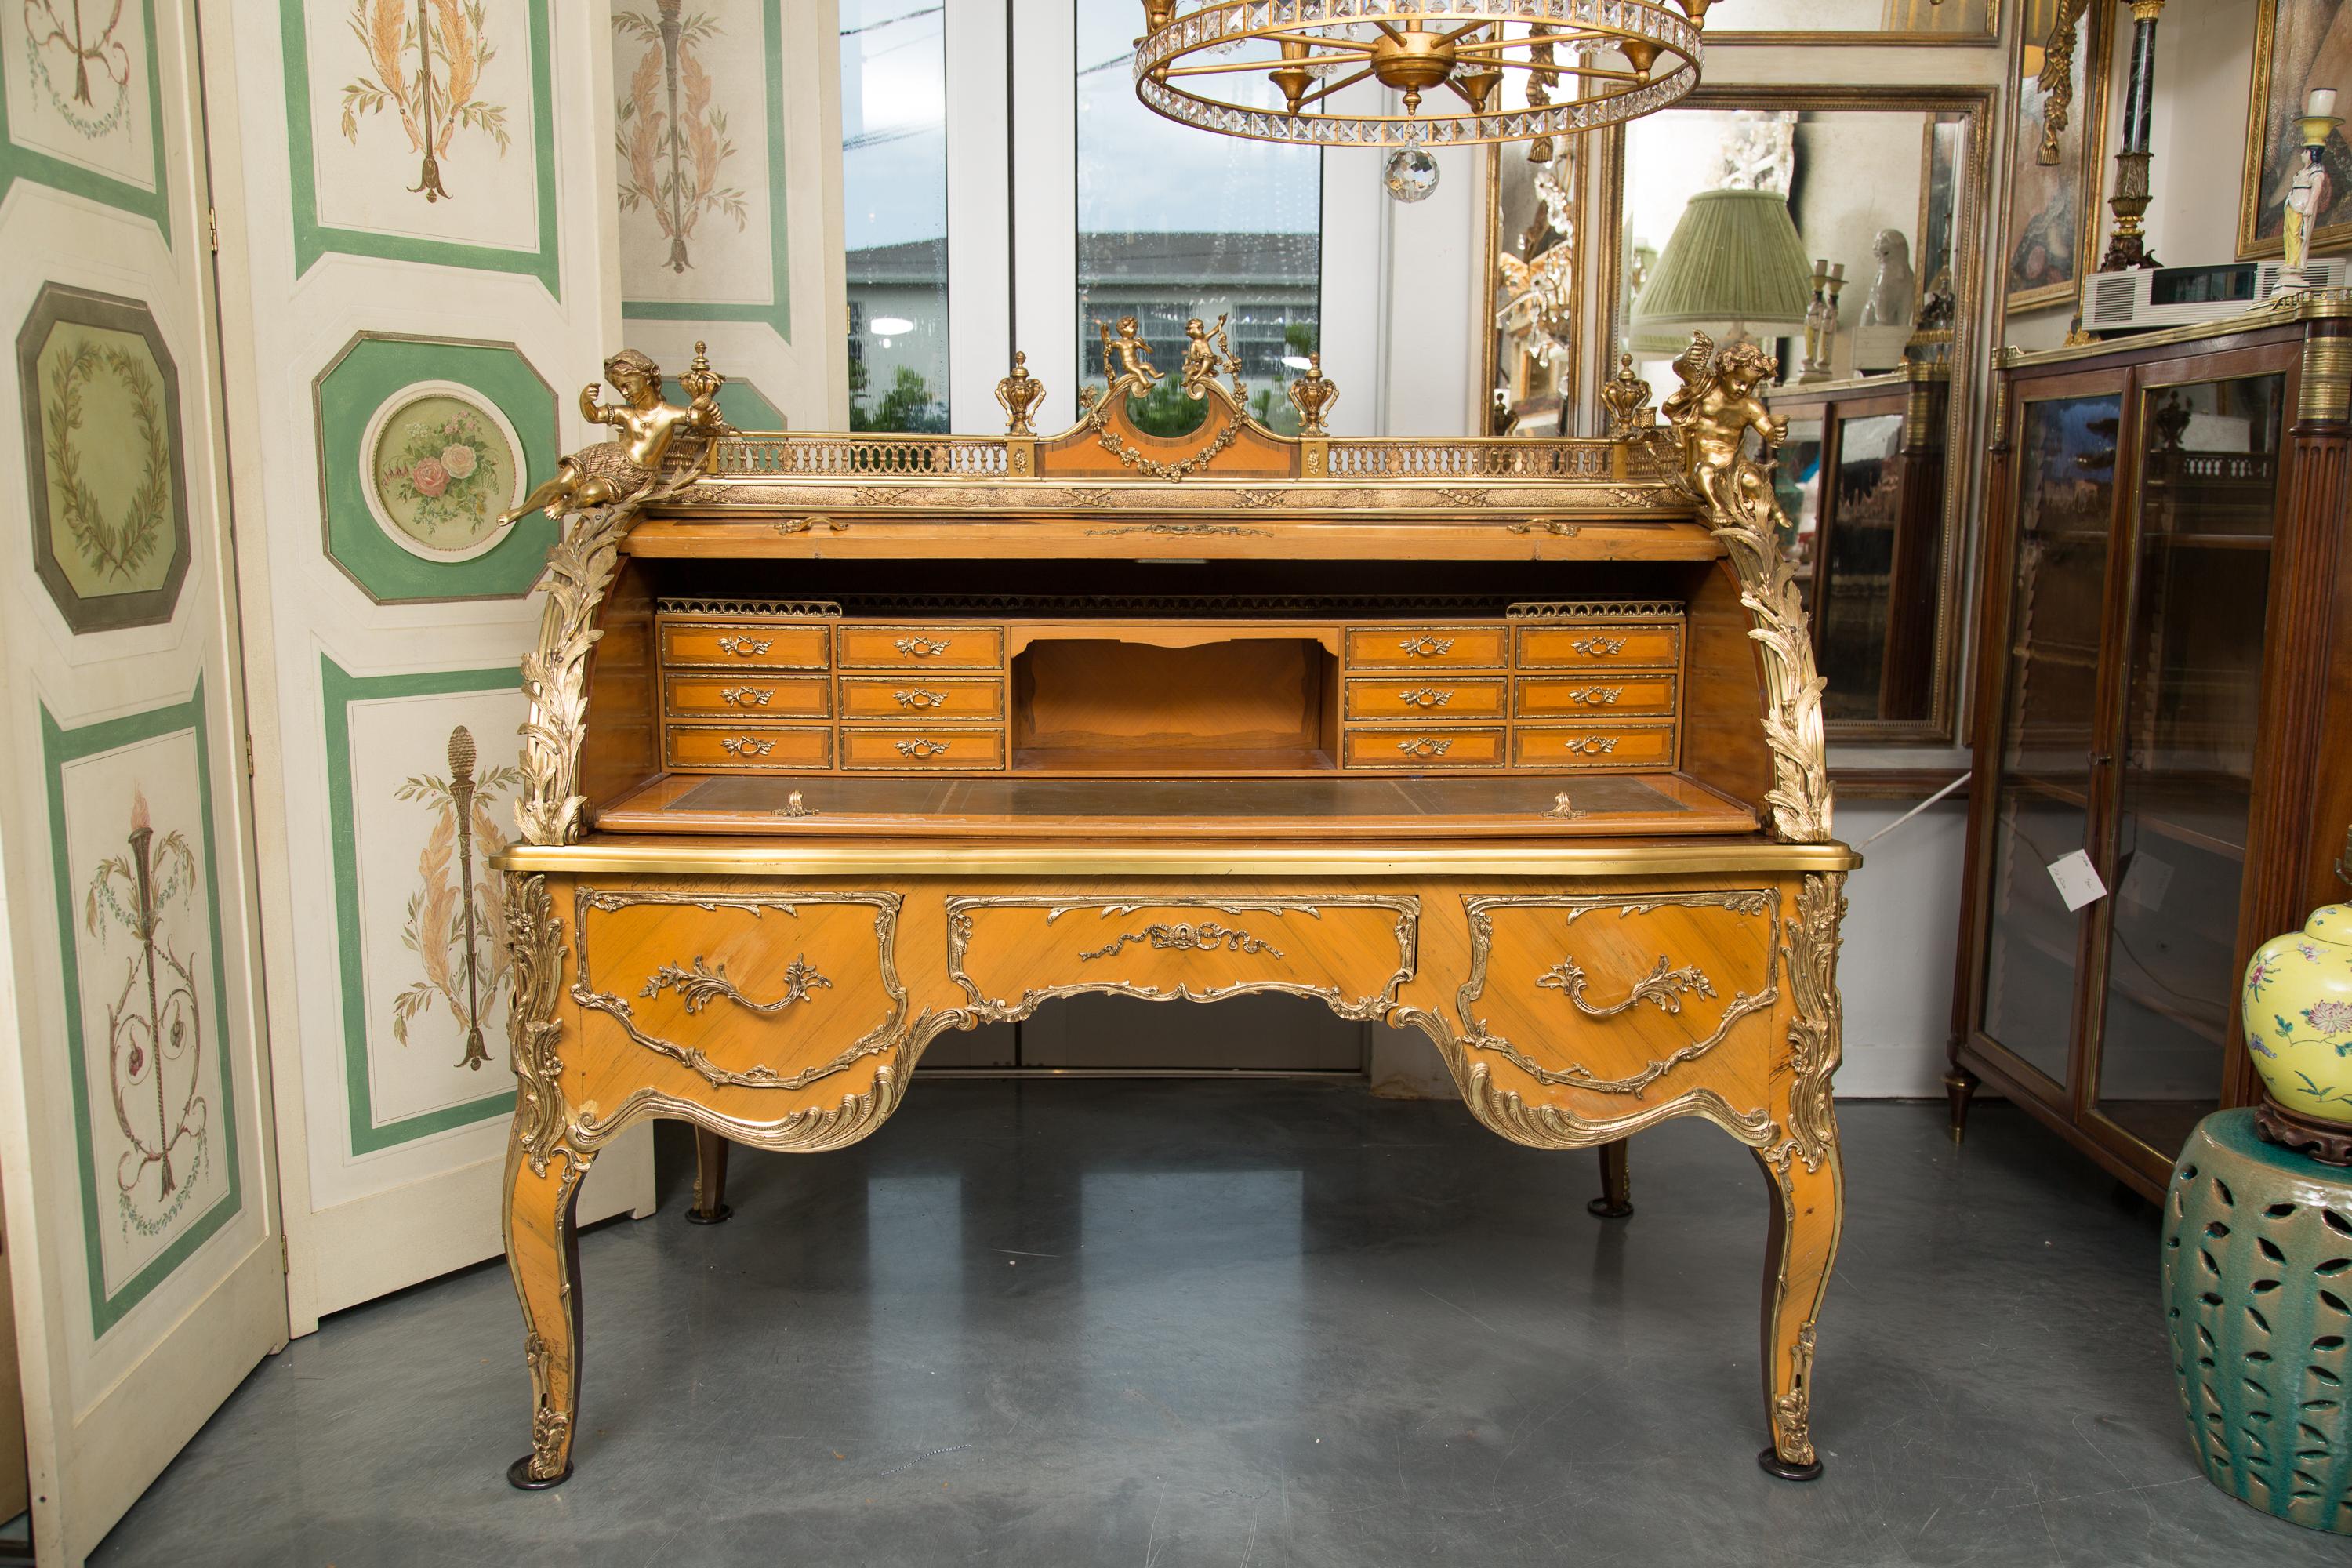 This is a stately and lavishly decorated Louis XV style cylinder desk. The top with a pierced brass gallery centered by an inverted arched pediment with cherubs. The top is flanked by four prominent brass figural putti and candle holders above an